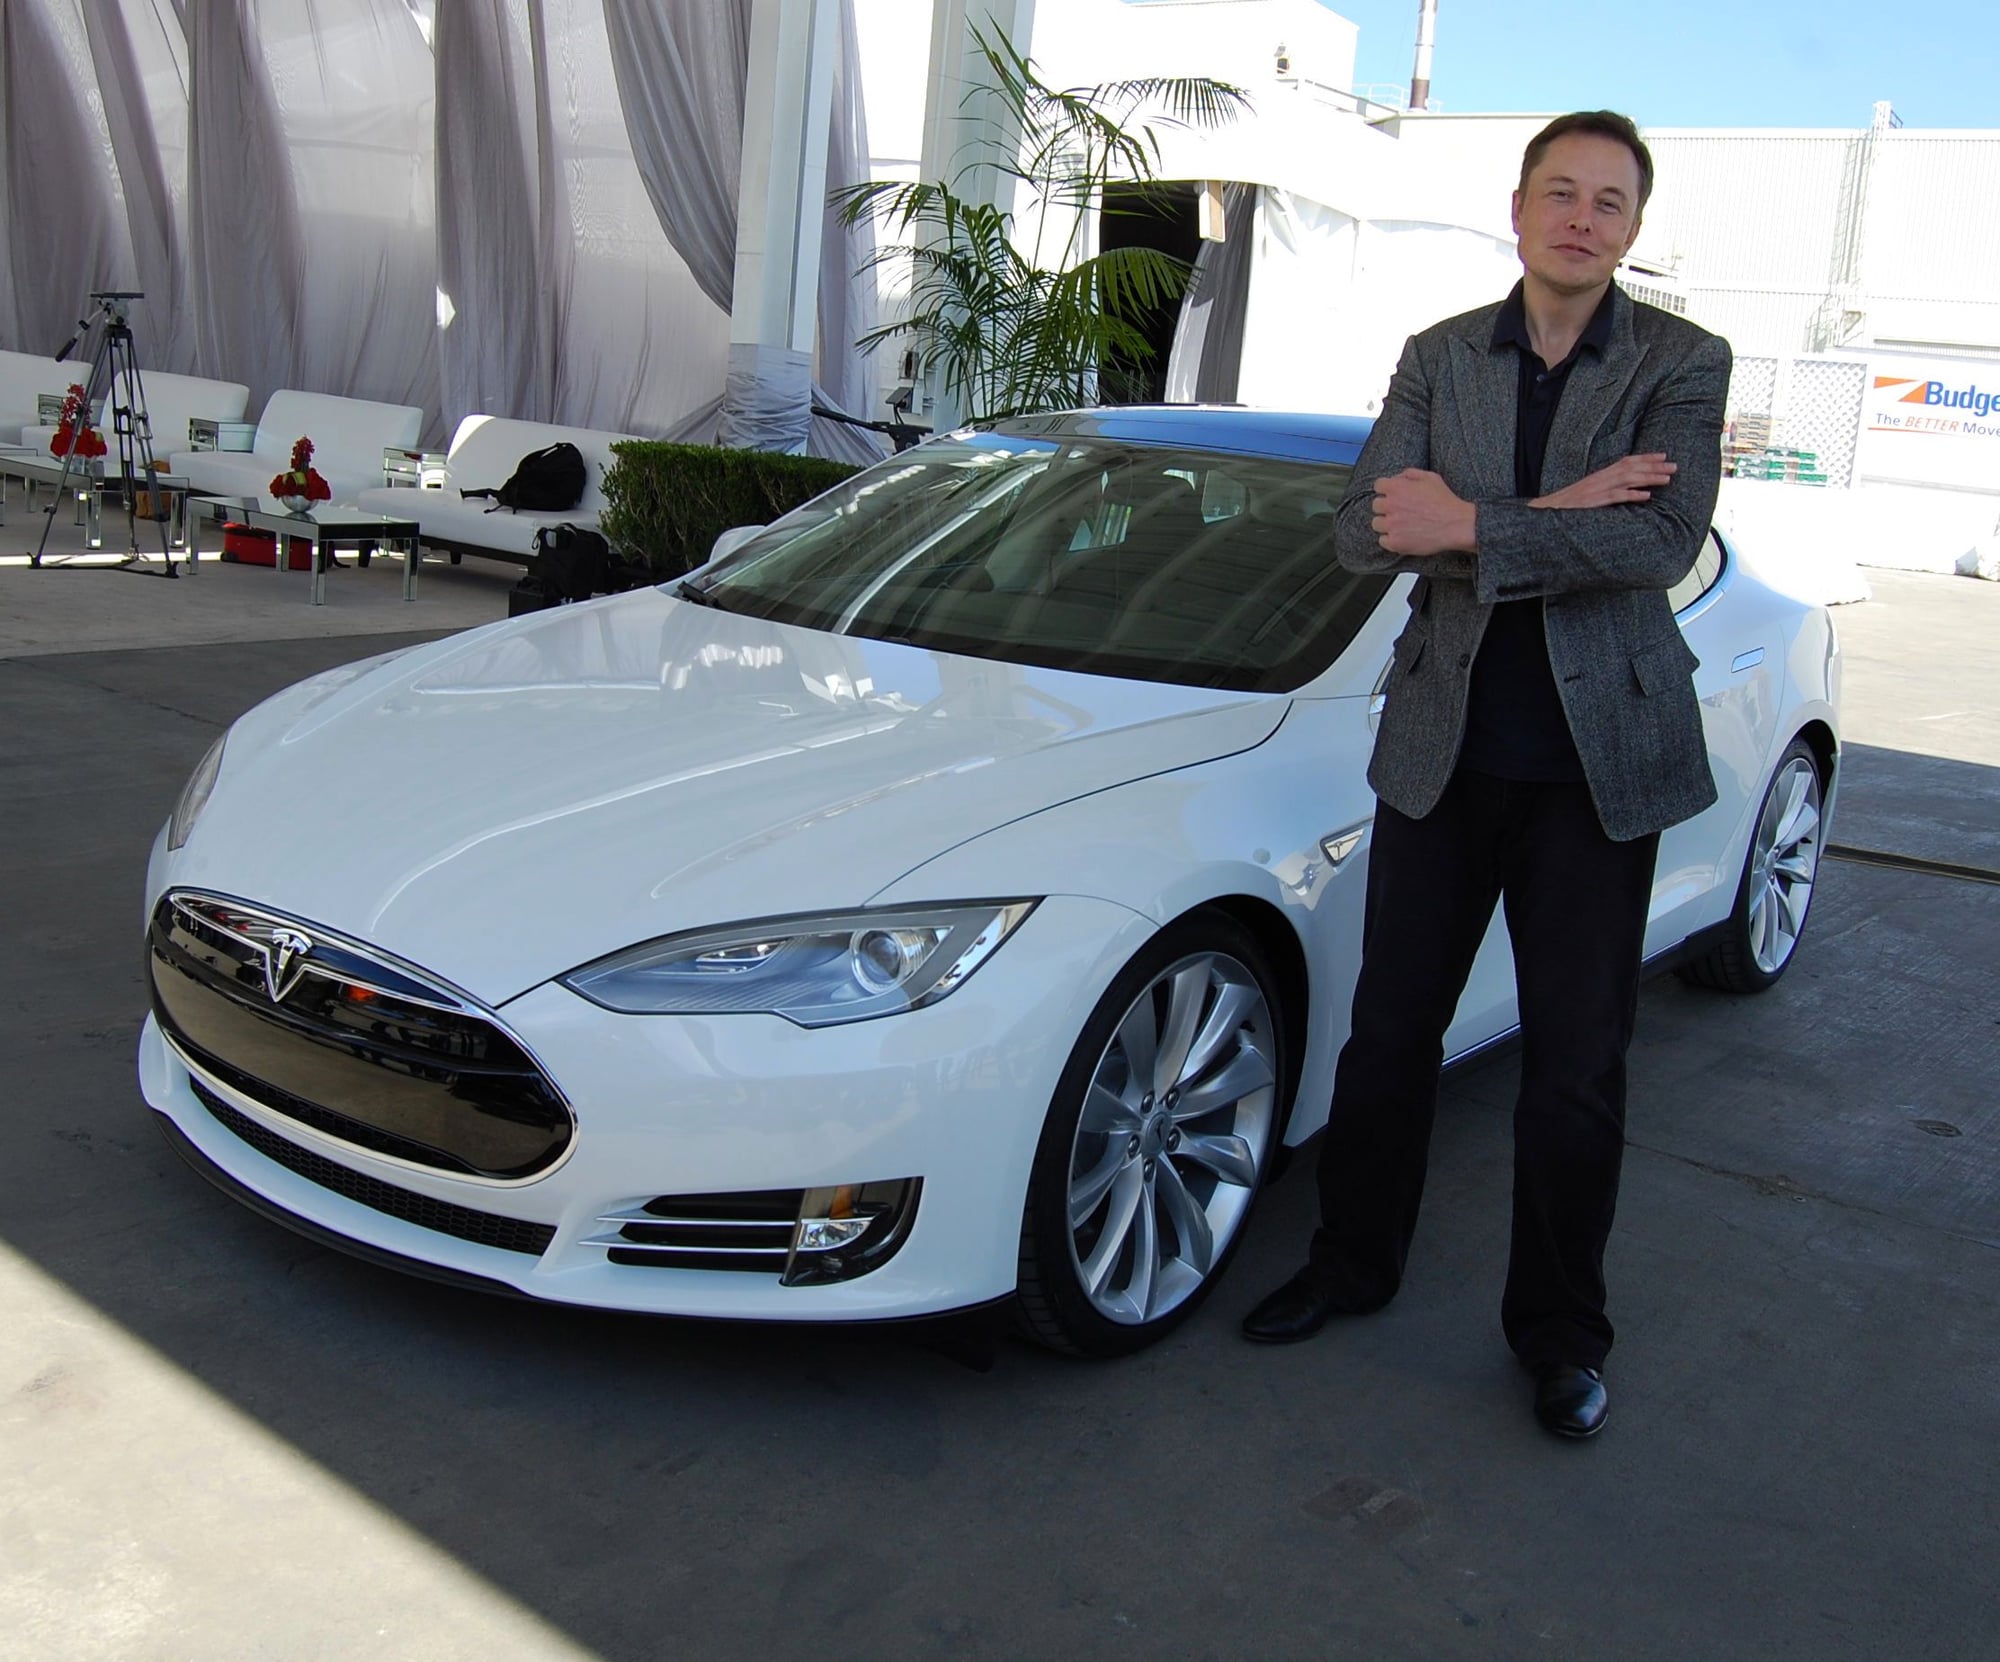 Elon Musk stands next to one of his signature Tesla electric cars.